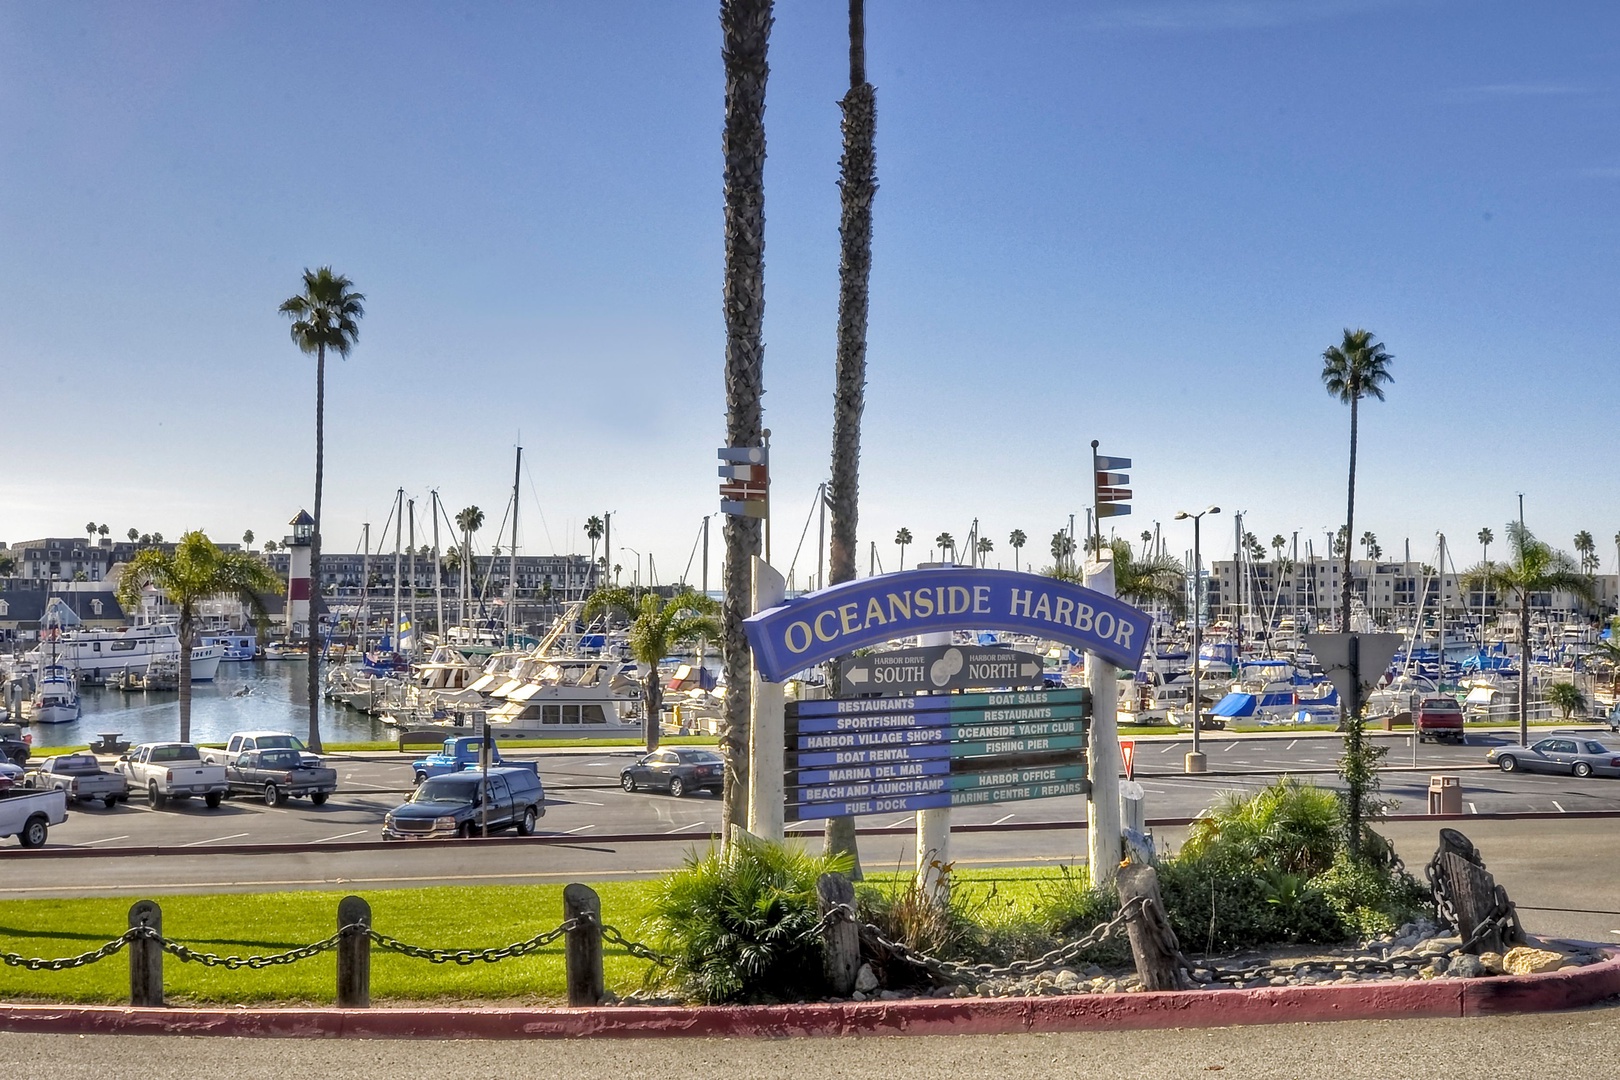 Explore local attractions such as the Oceanside Harbor